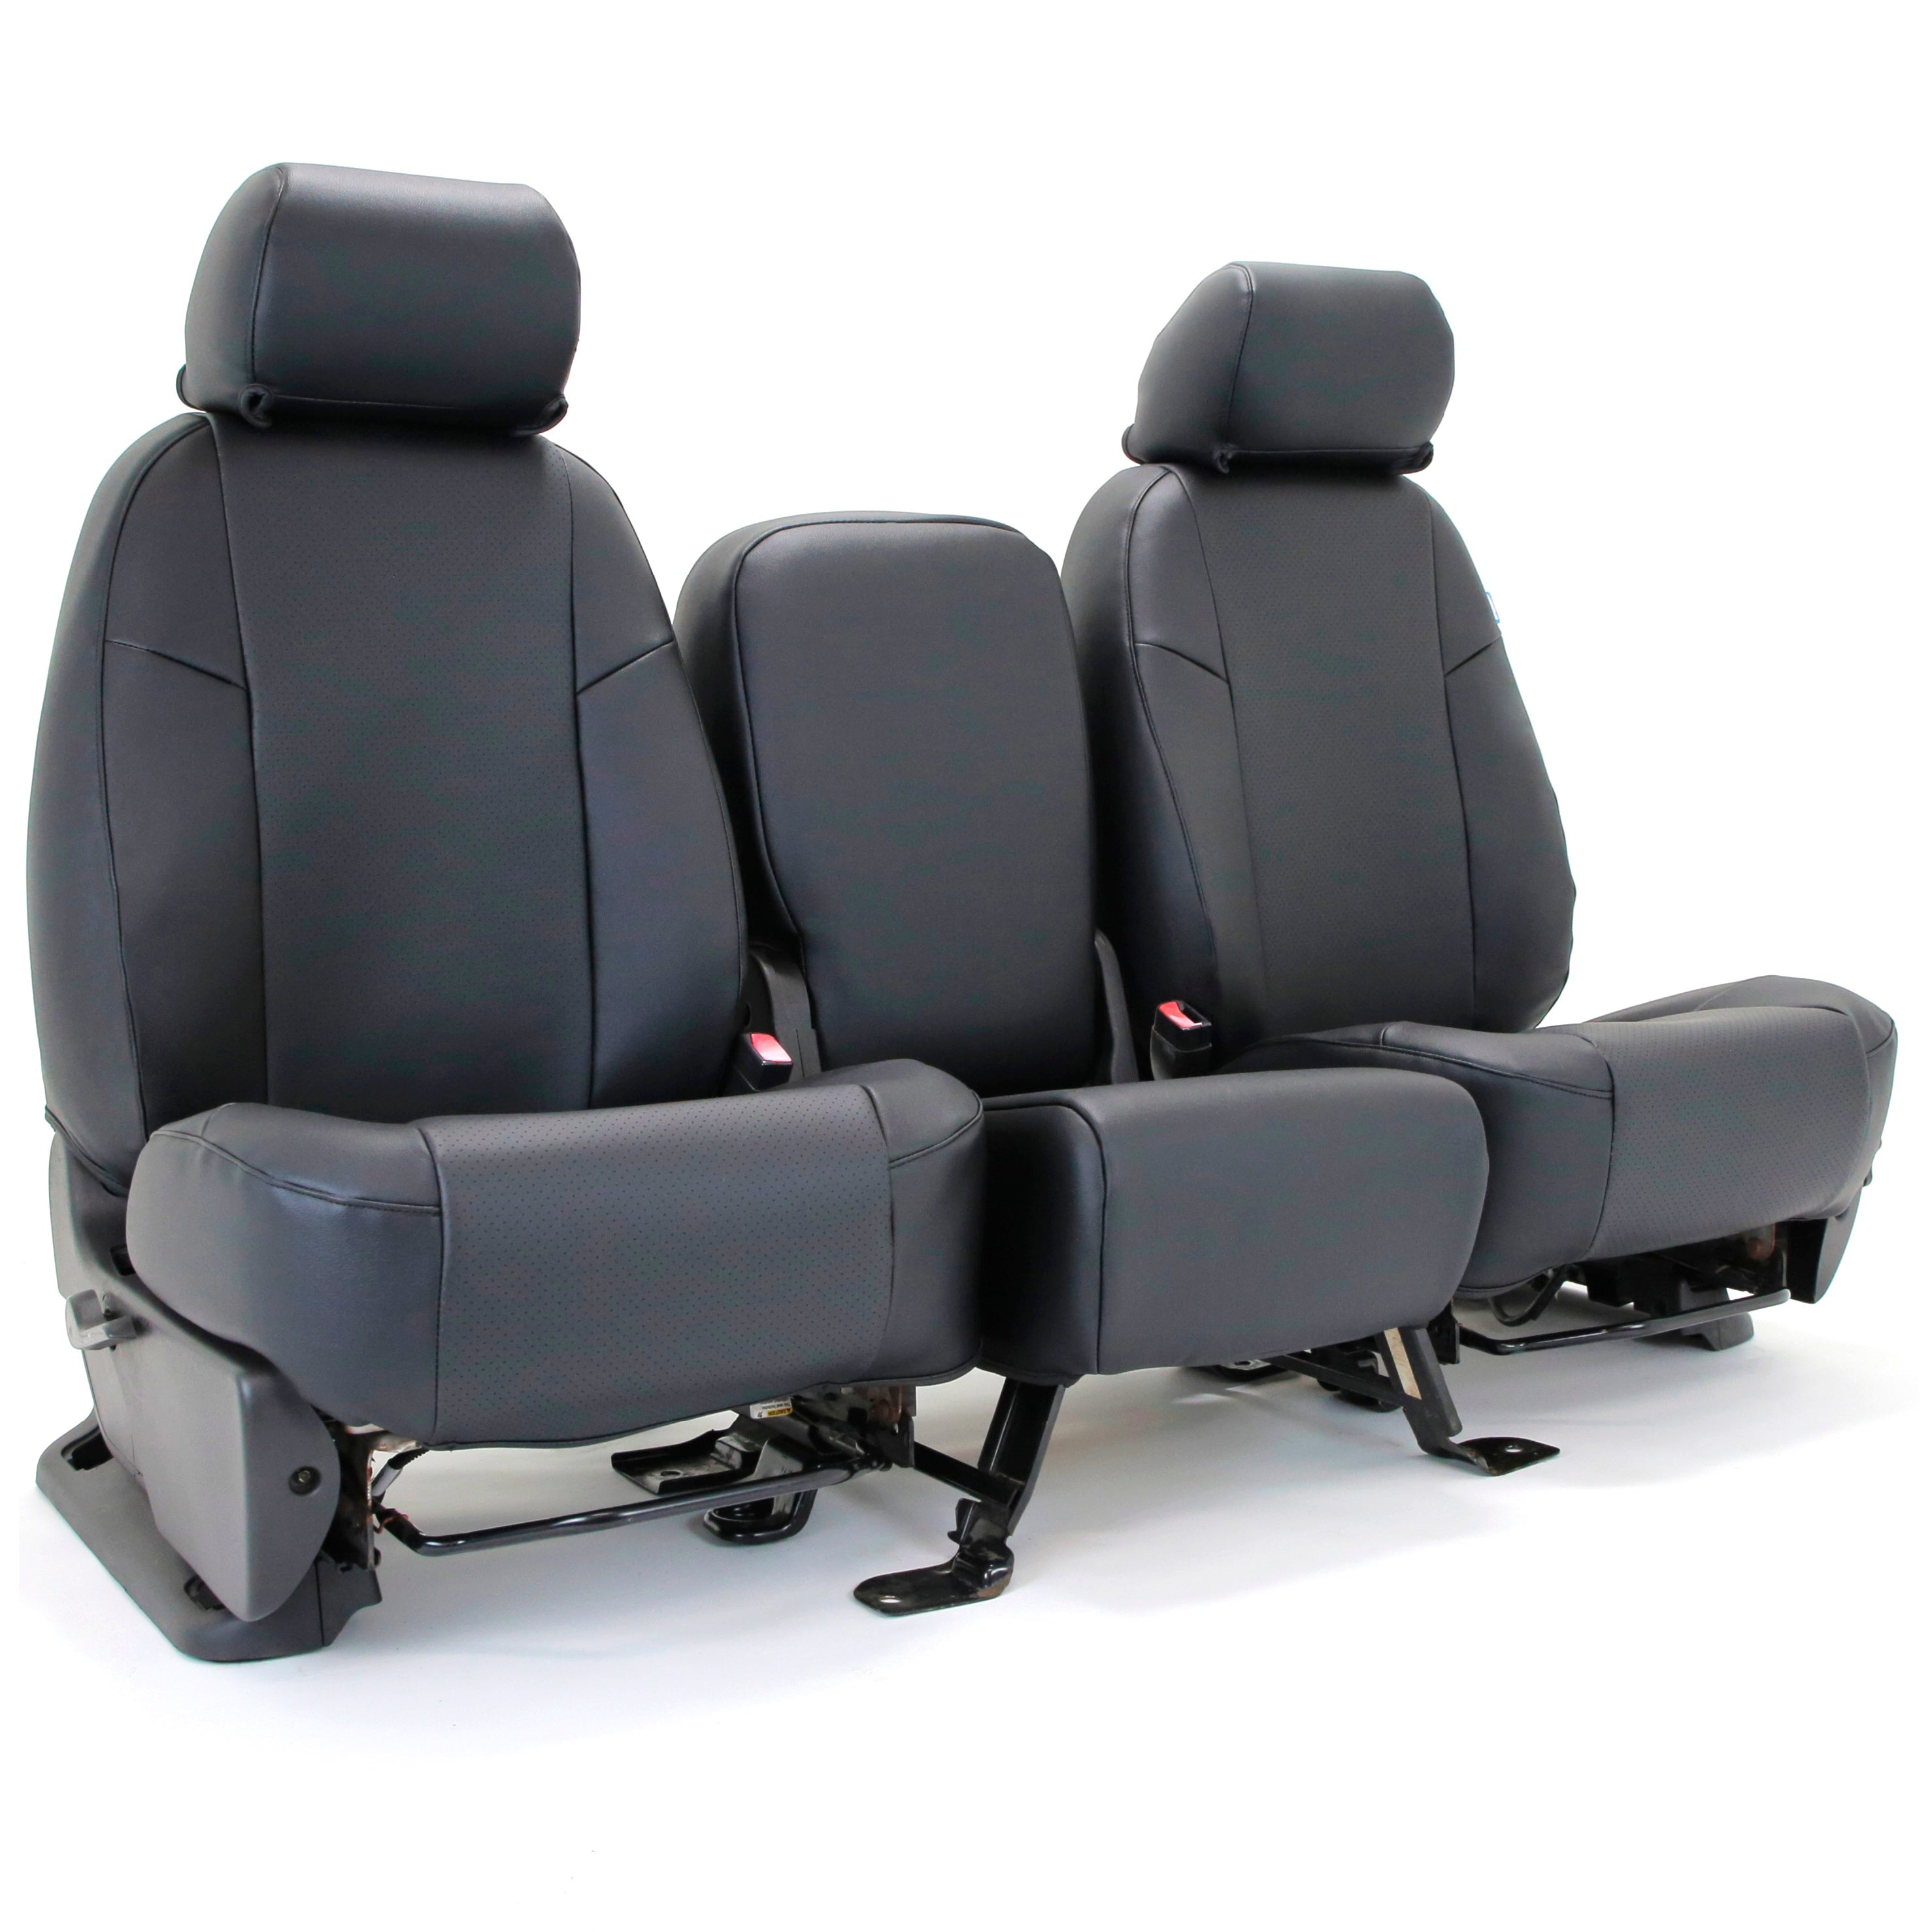 Durable Leather Car Seat Covers Built to Last